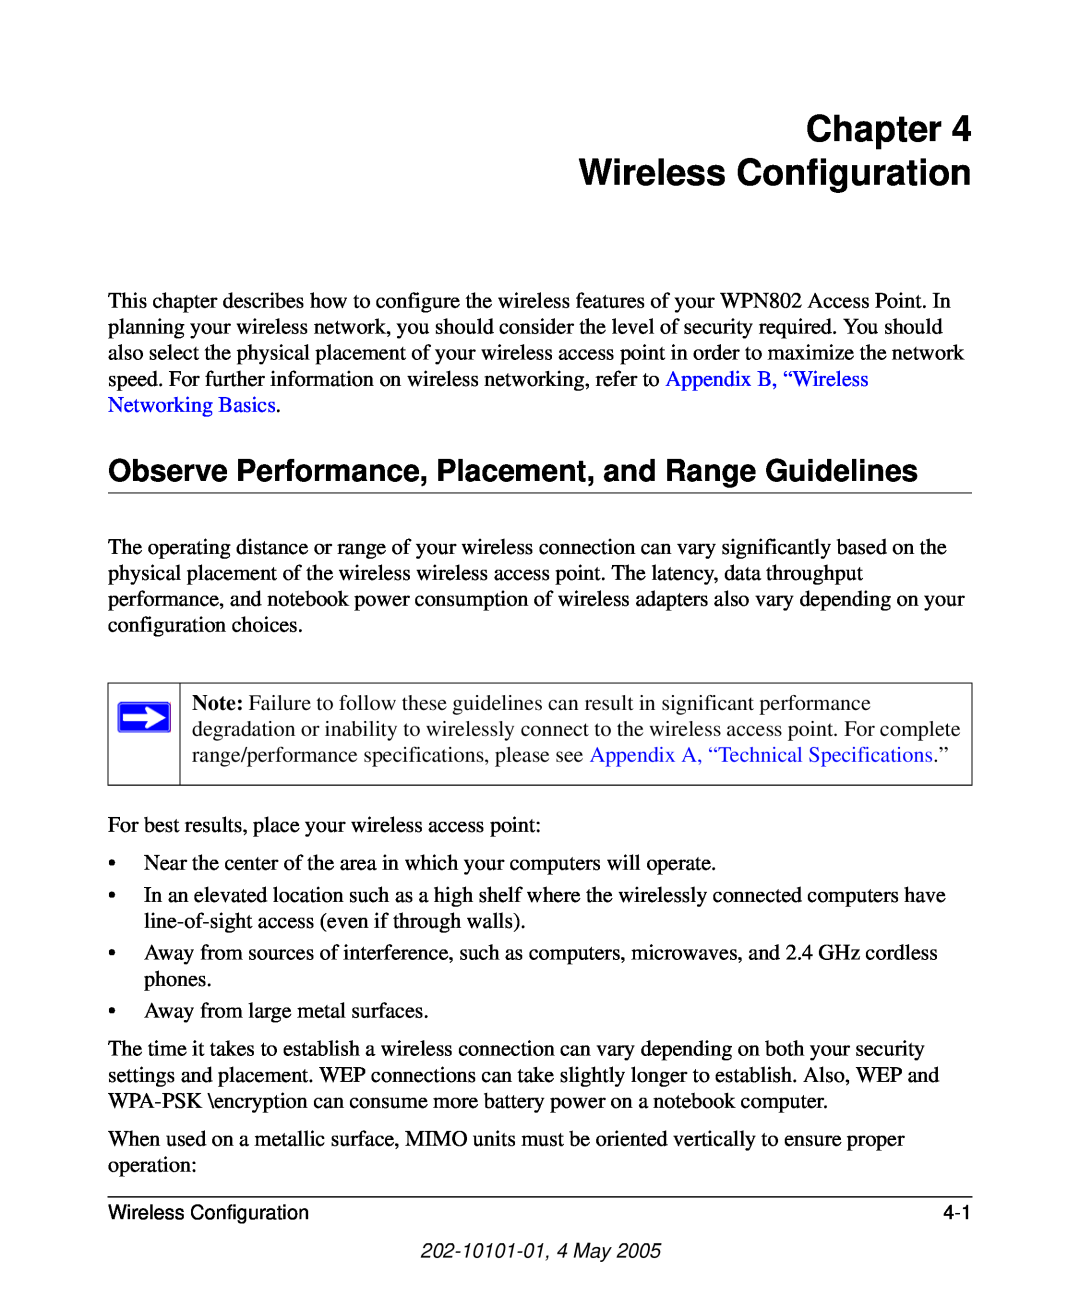 NETGEAR WPN802 manual Chapter Wireless Configuration, Observe Performance, Placement, and Range Guidelines 